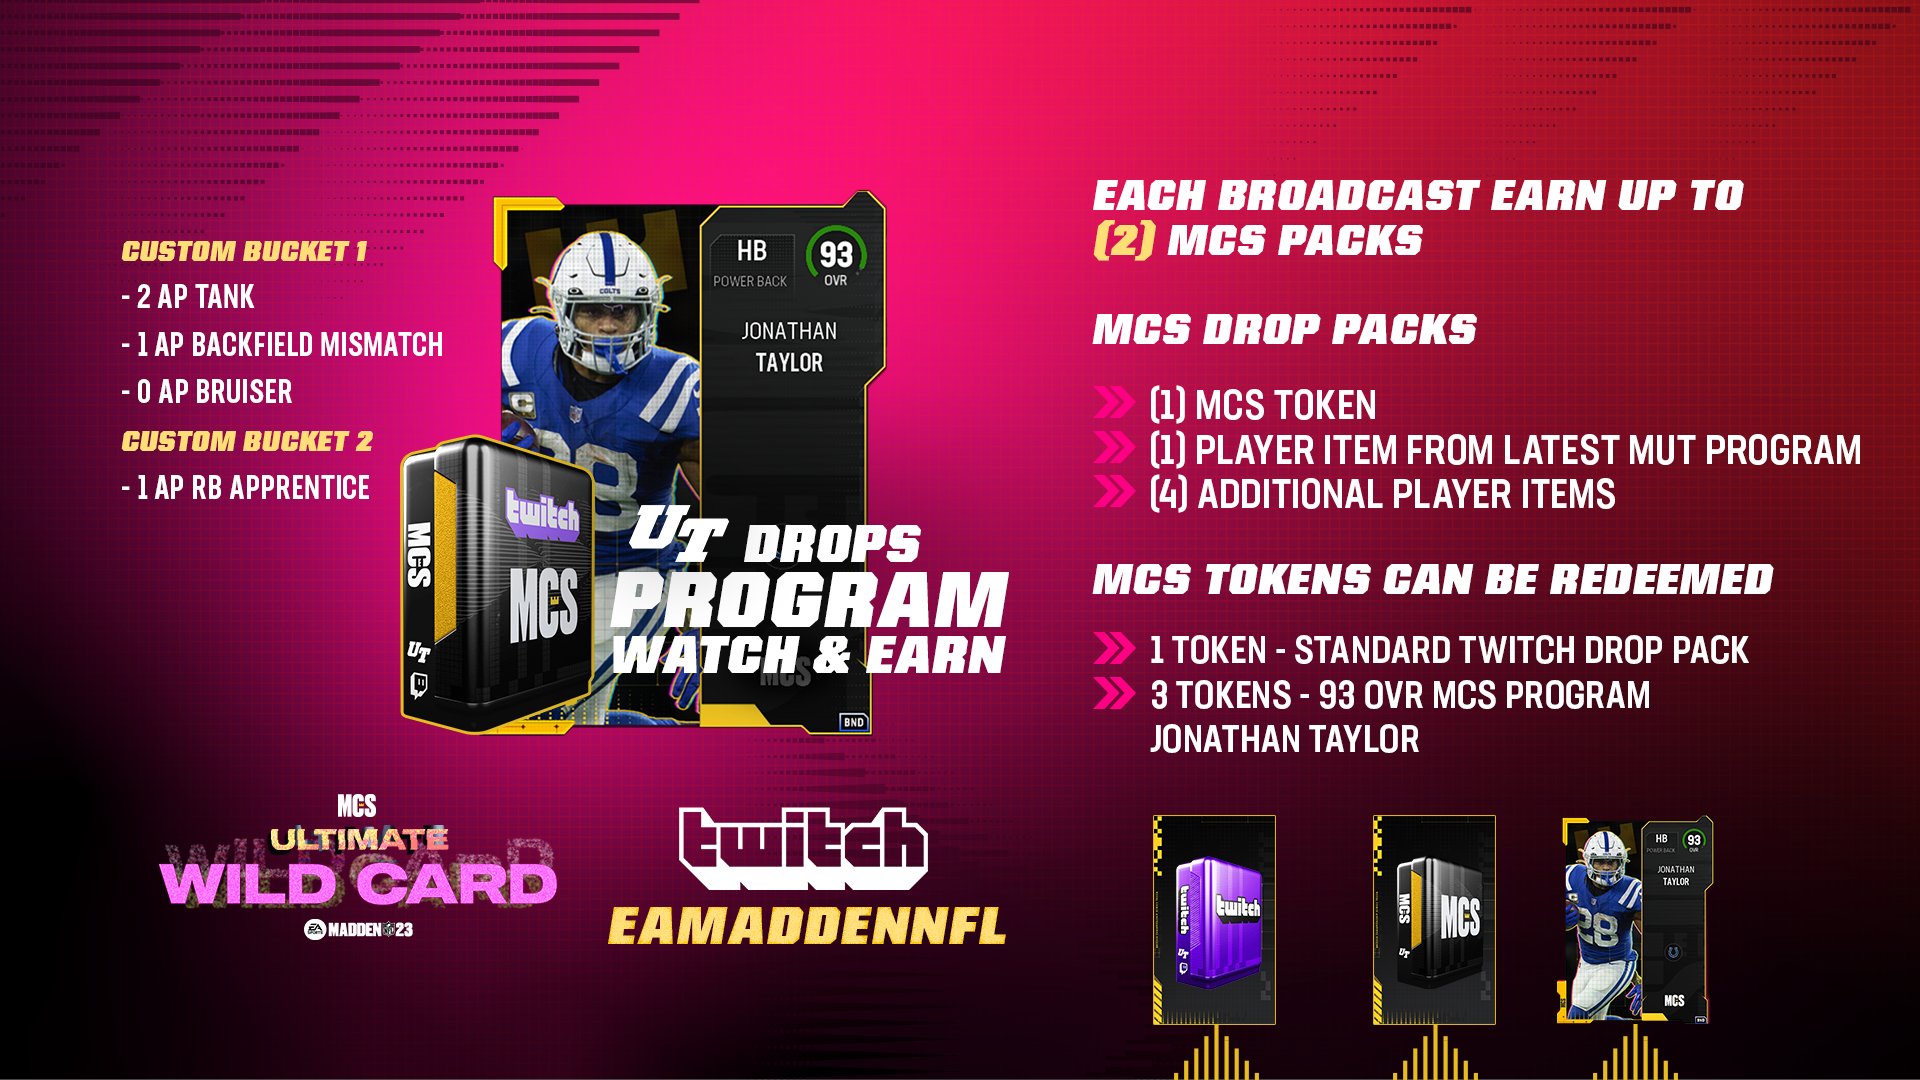 Madden Championship Series on X: Tune in to the Ultimate #MaddenBowl  Monday at 7 PM to earn big time Twitch drop rewards! 💥🏈🎮 Twitch:   Account linking:    / X